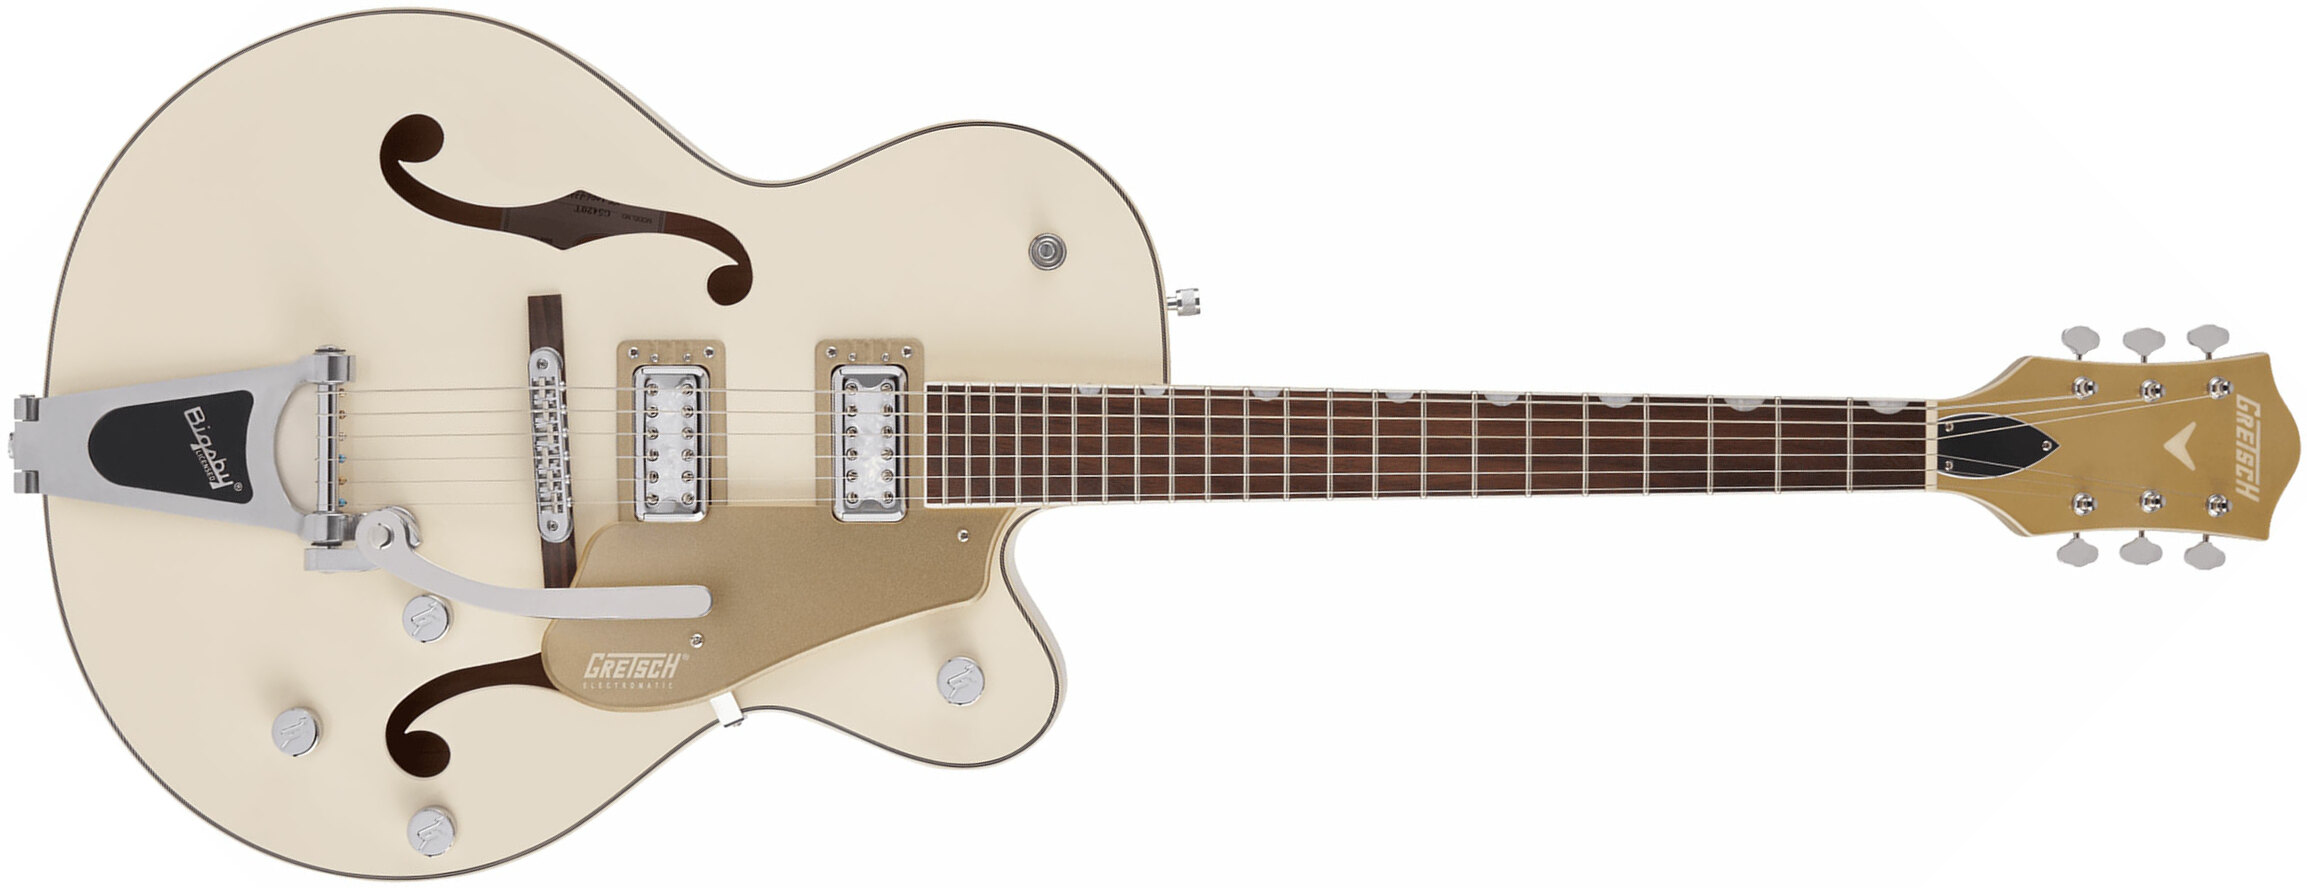 Gretsch G5410t Tri-five Electromatic Hollow Hh Bigsby Rw - Two-tone Vintage White/casino Gold - Guitarra eléctrica semi caja - Main picture